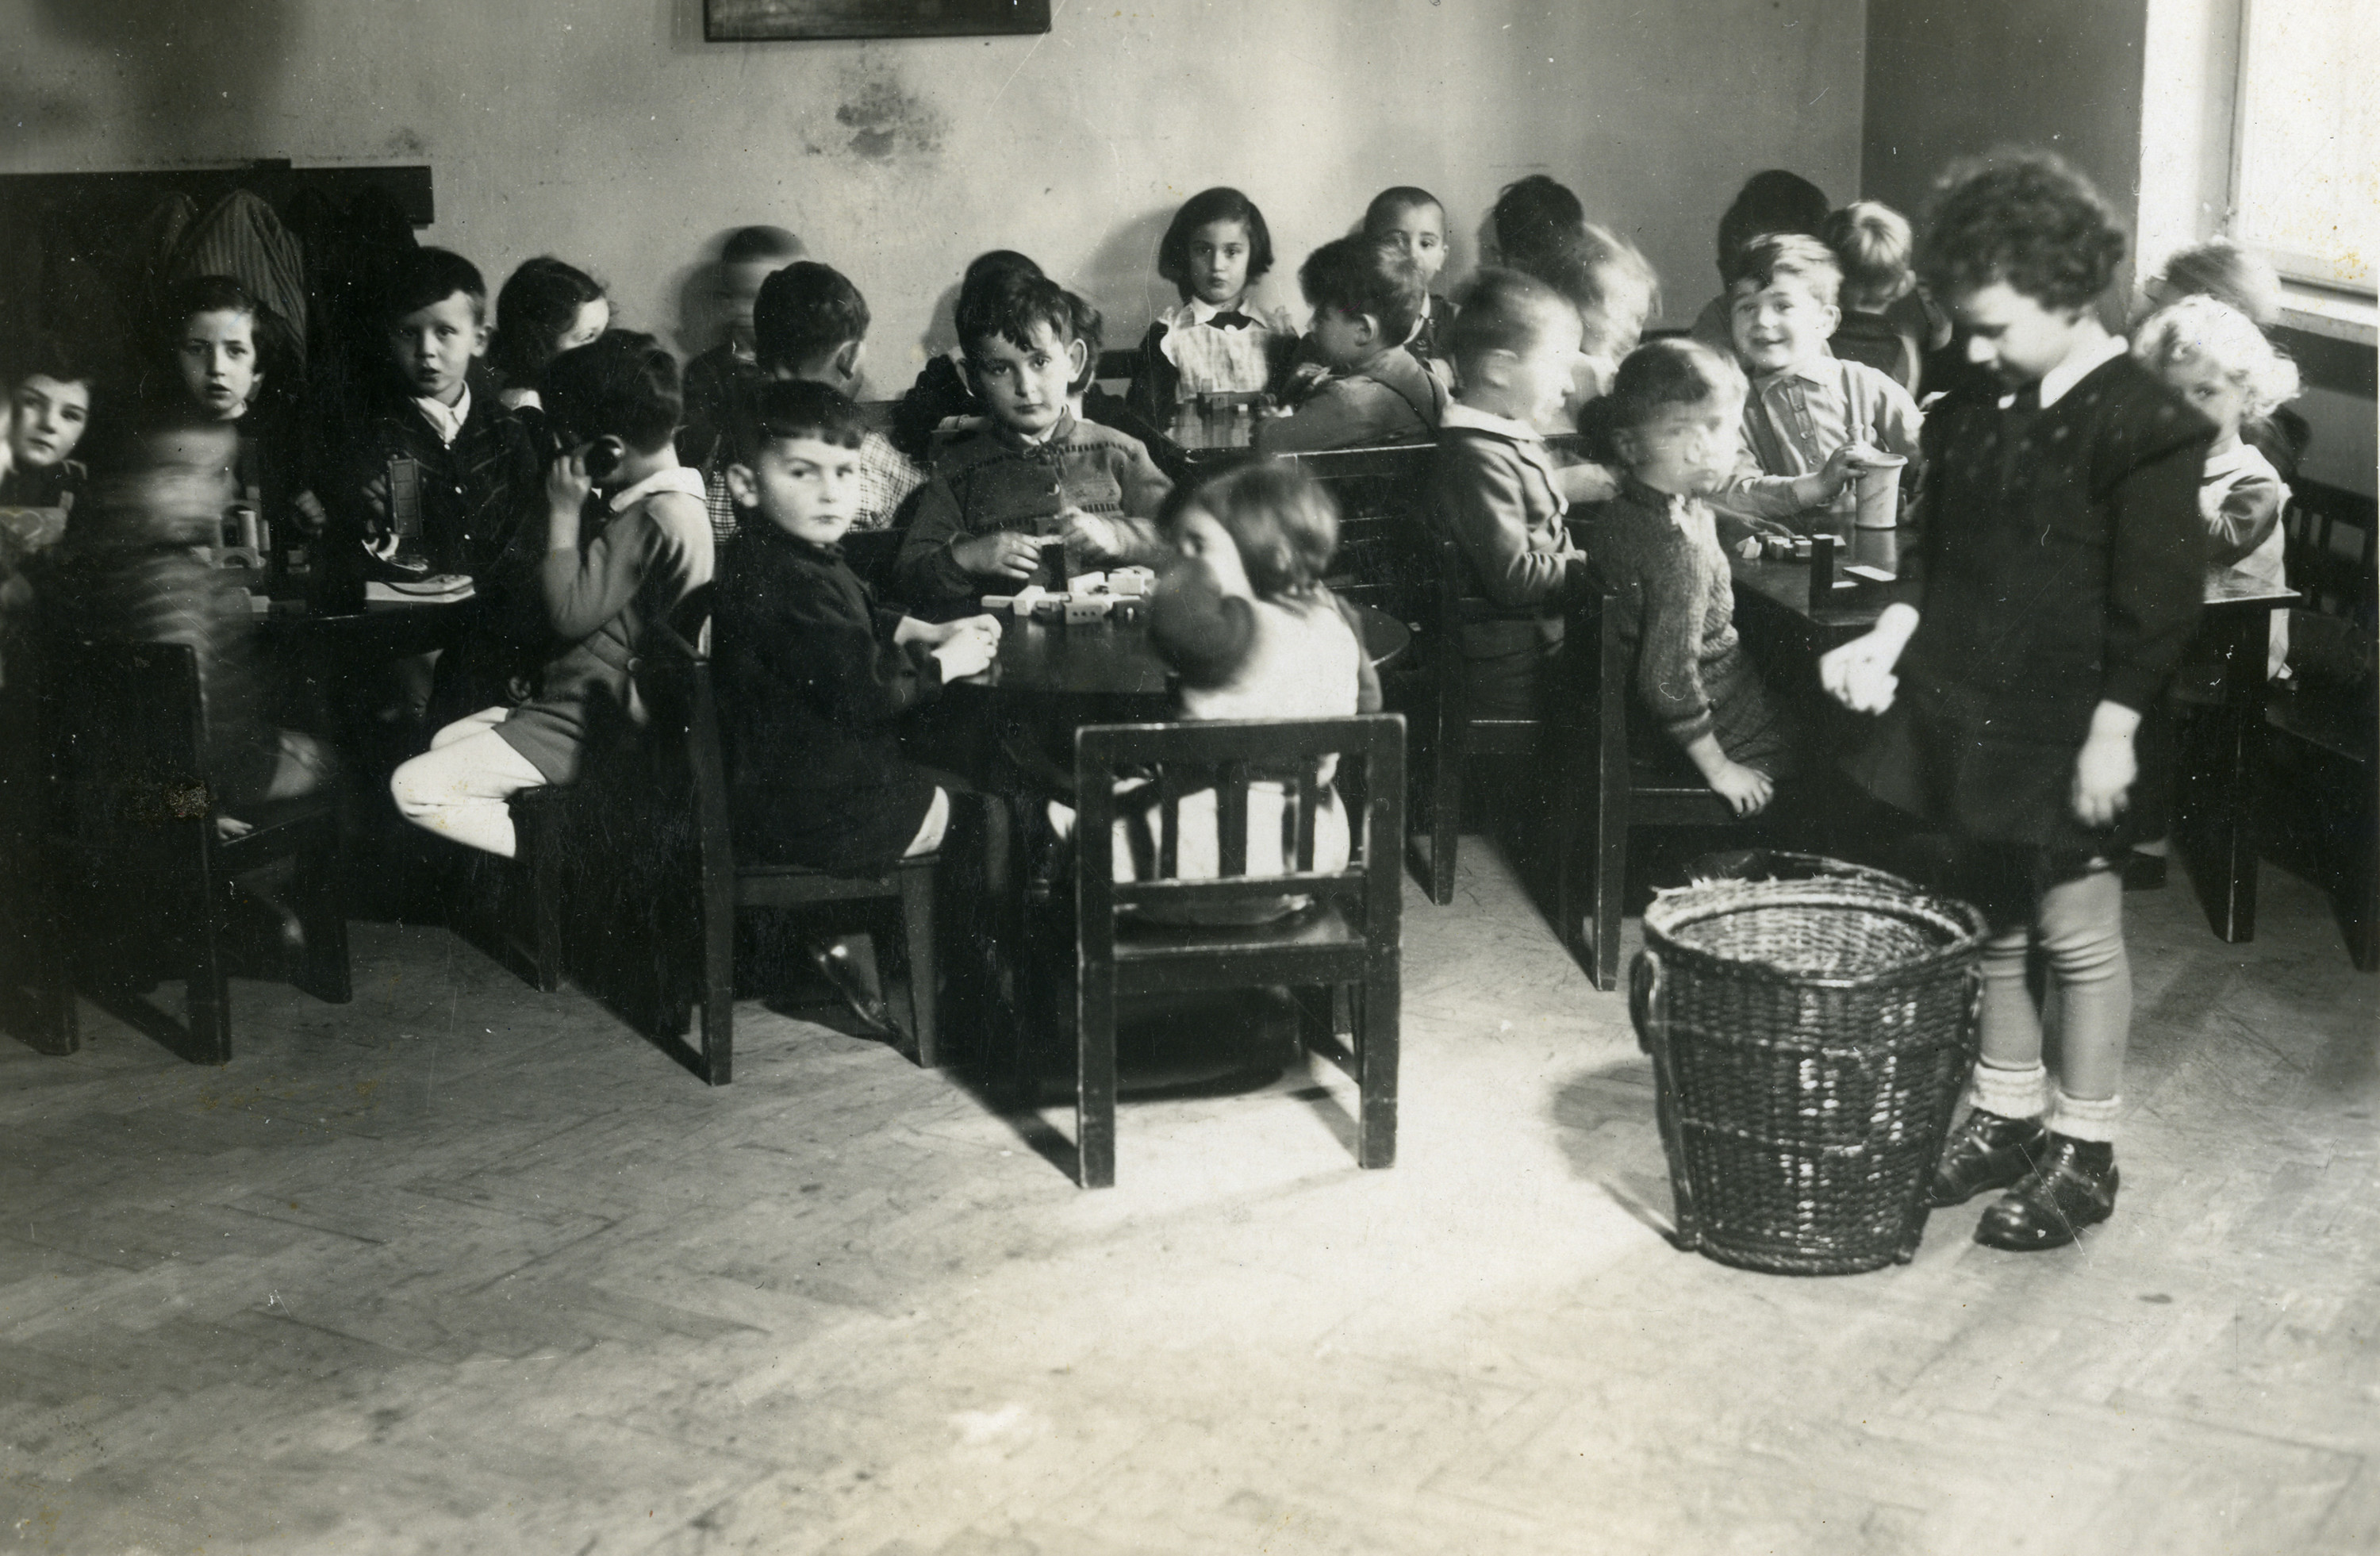 Kindergarten children sit at their desks at a school in Zilina.

Among those pictured is Itzhak Platzner (third from the left).